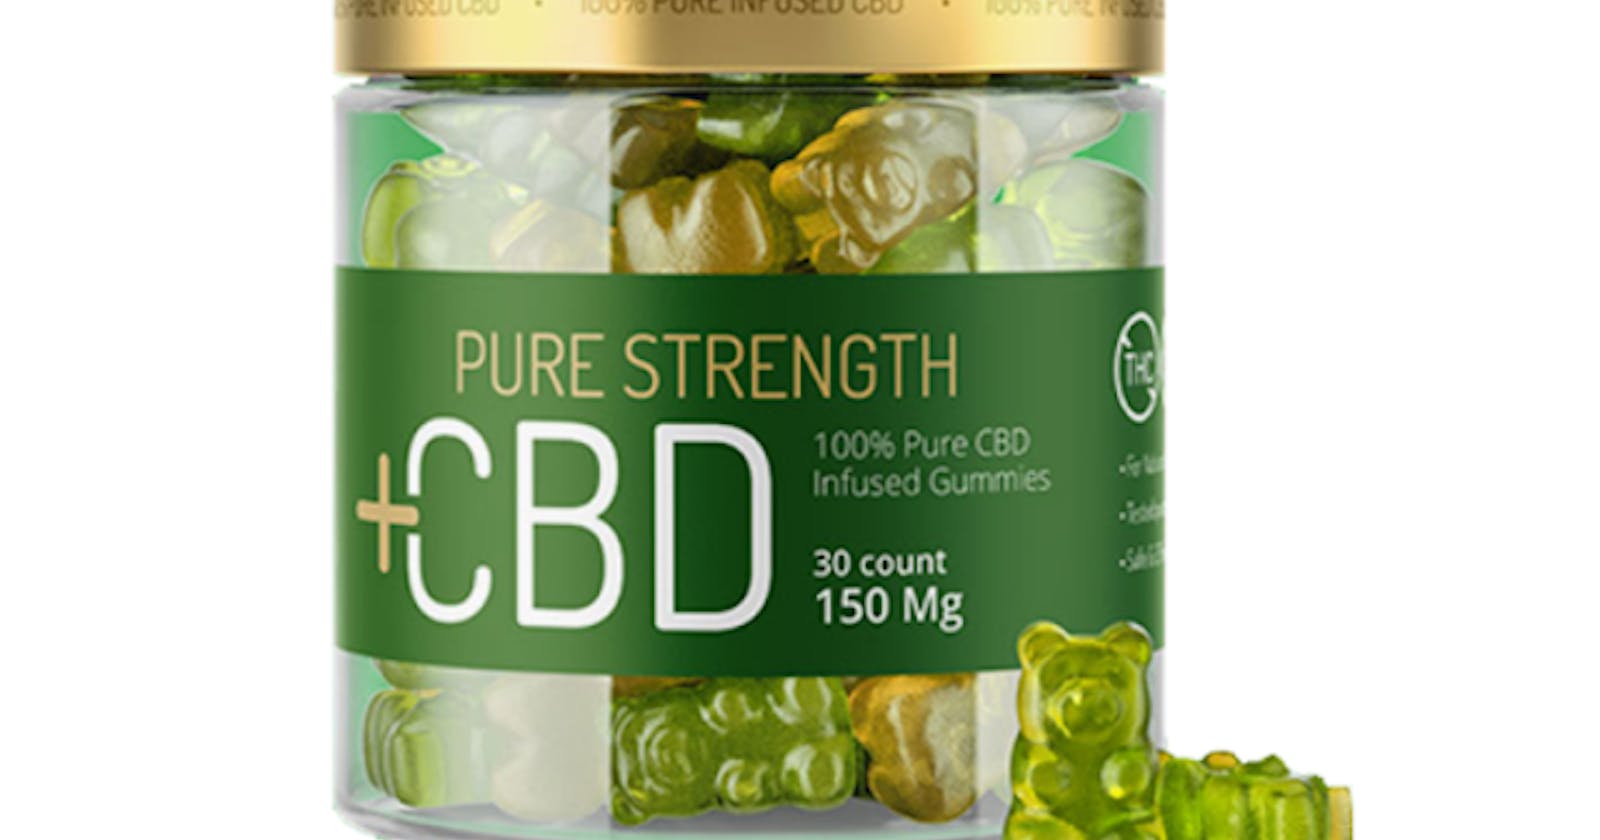 Pure Strength CBD Gummies for Empowering Your Body and Mind